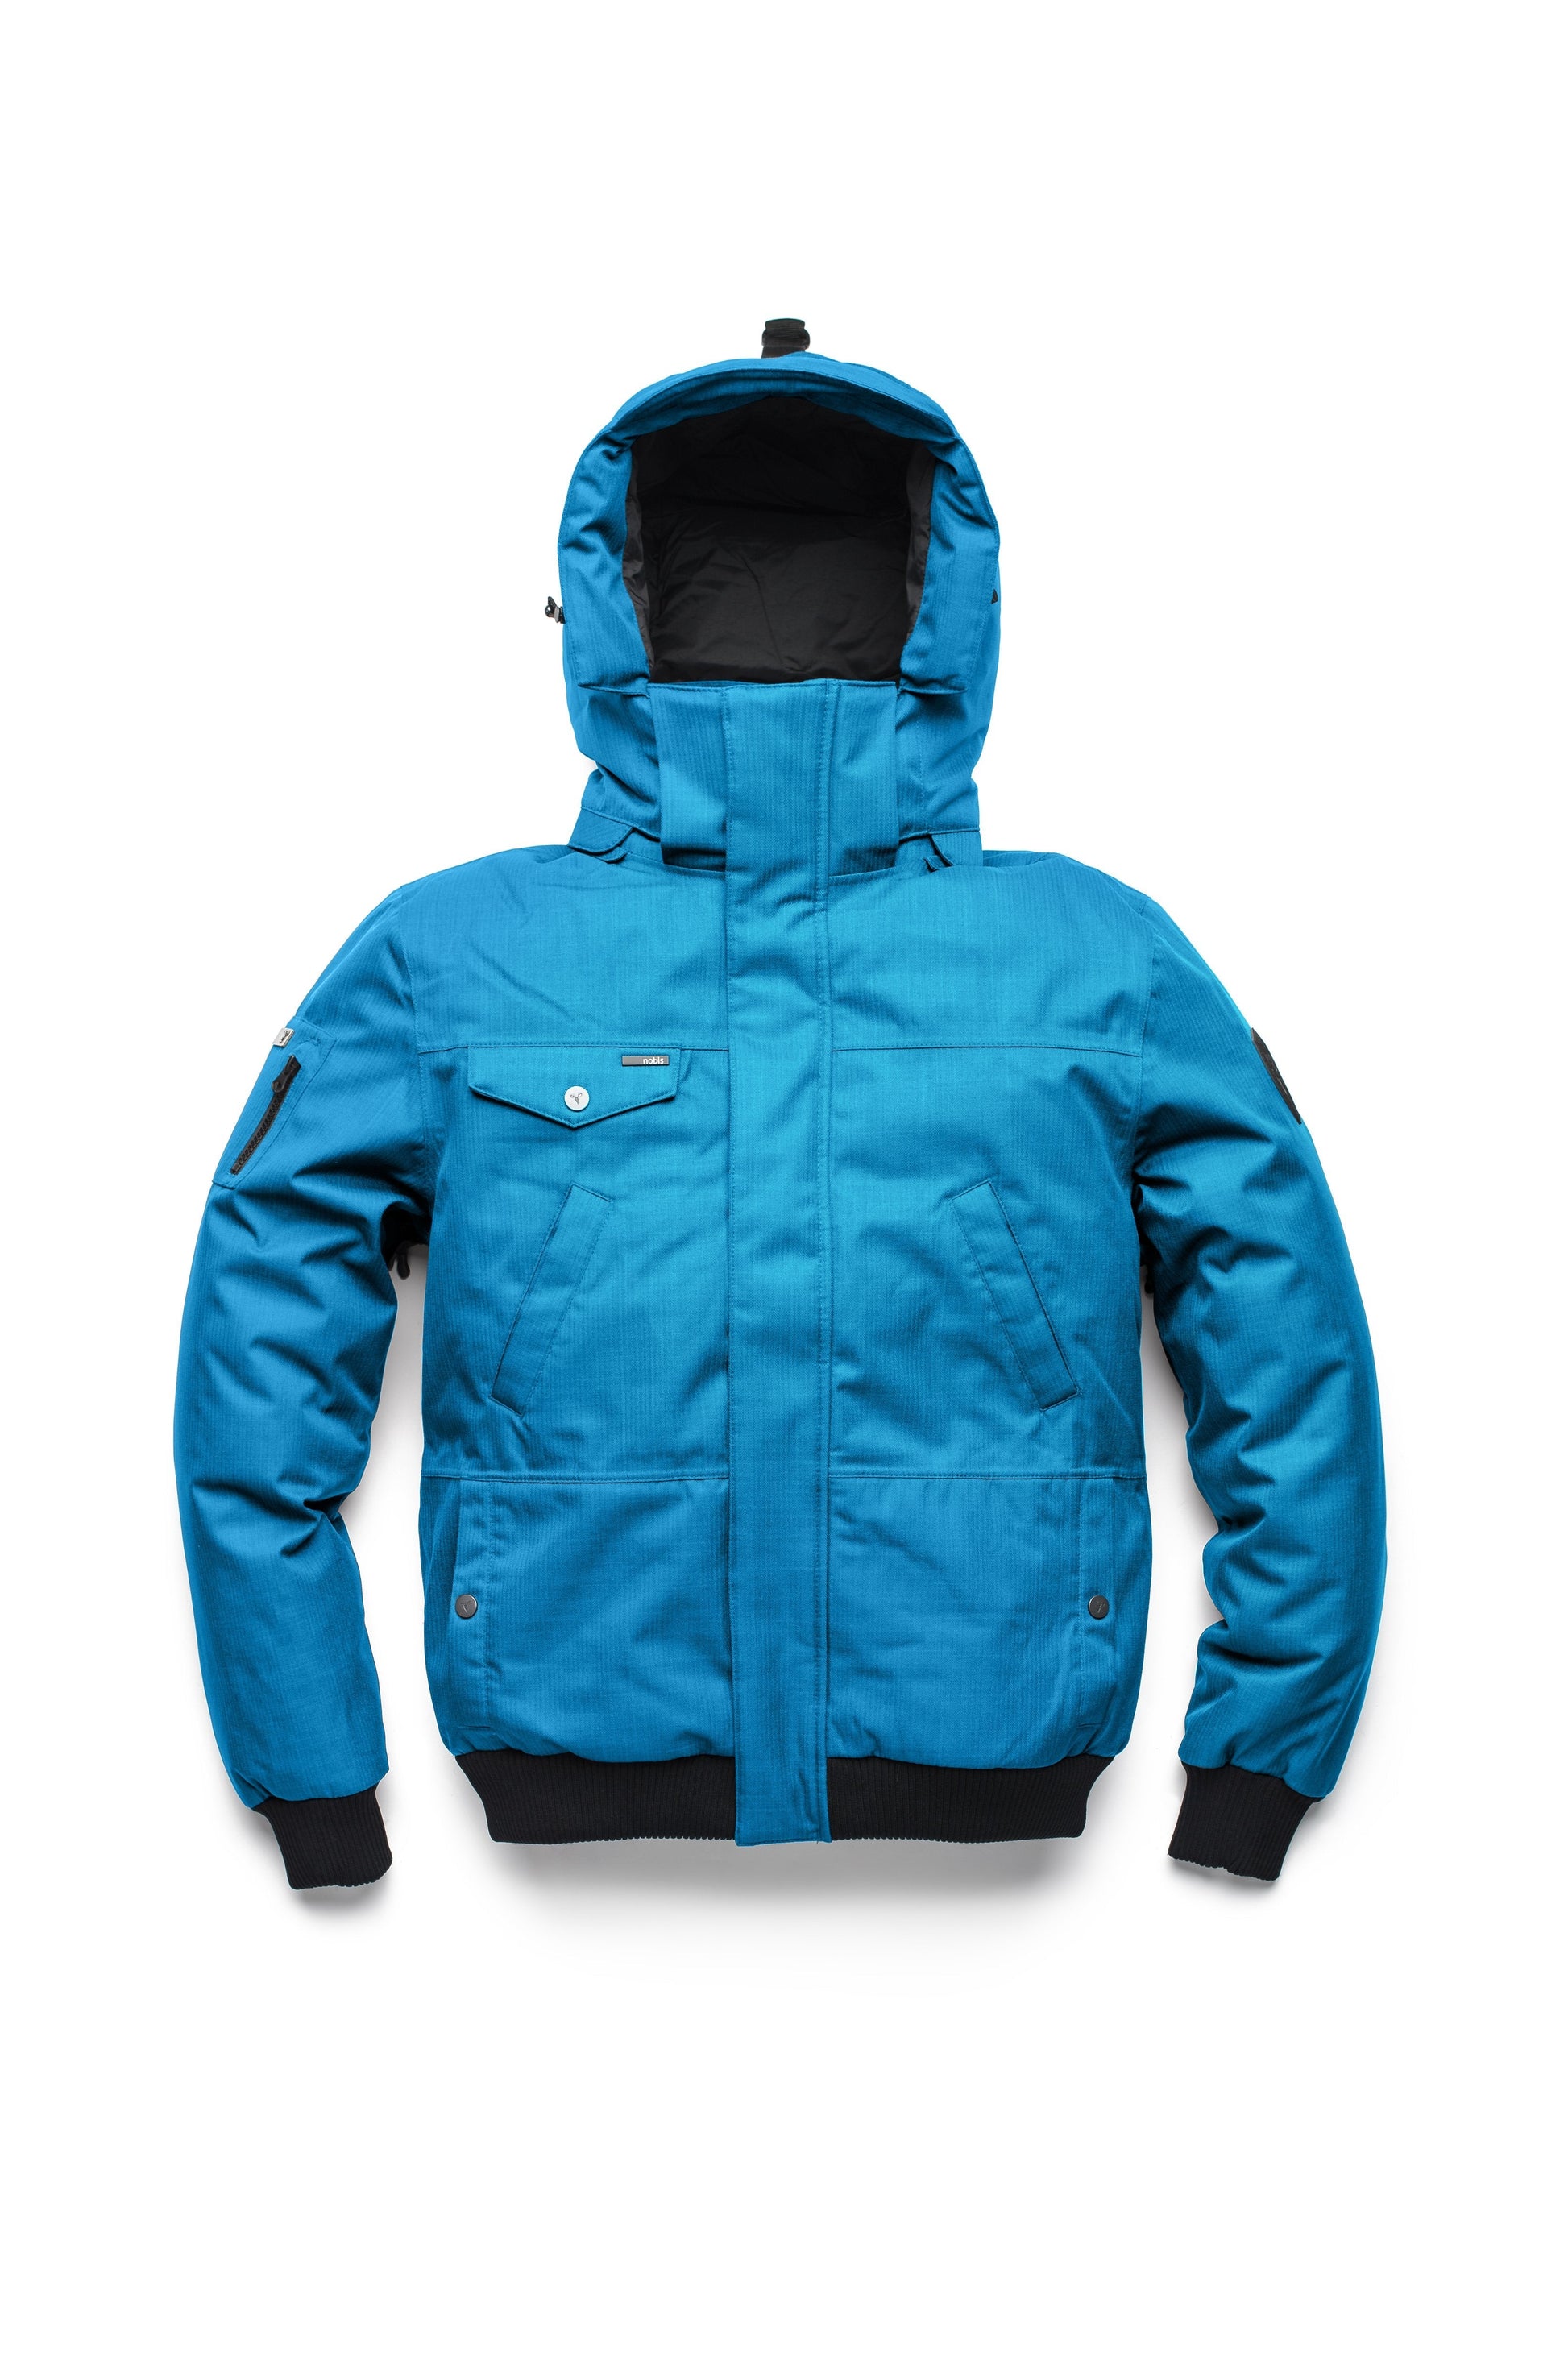 Men's sleek down filled bomber jacket with clean details and a fur free hood in Sea Blue